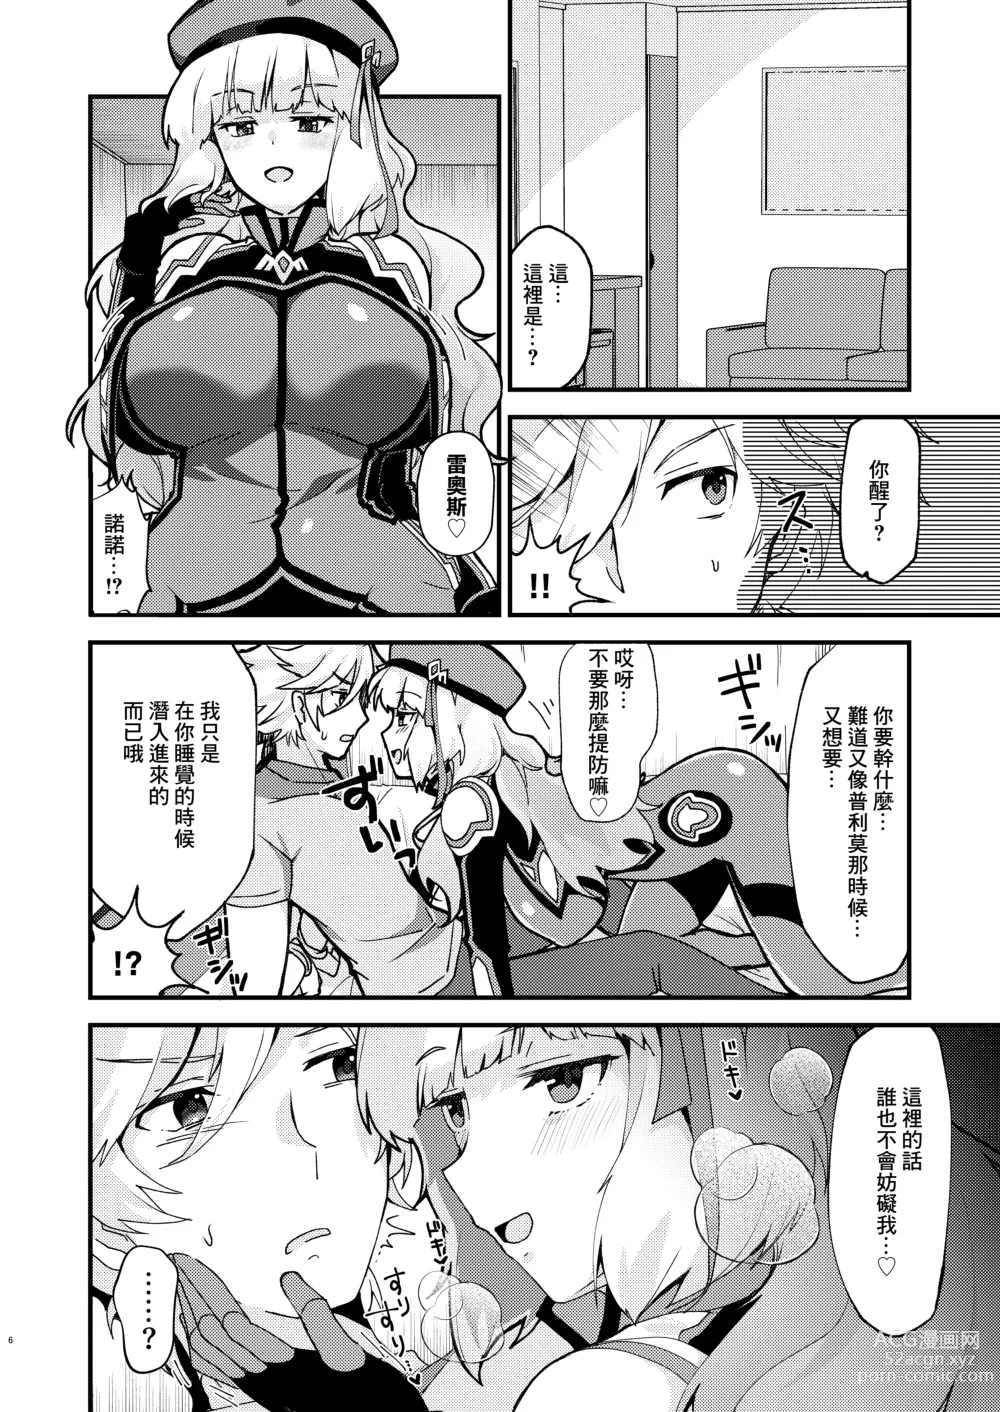 Page 6 of doujinshi 諾諾強襲